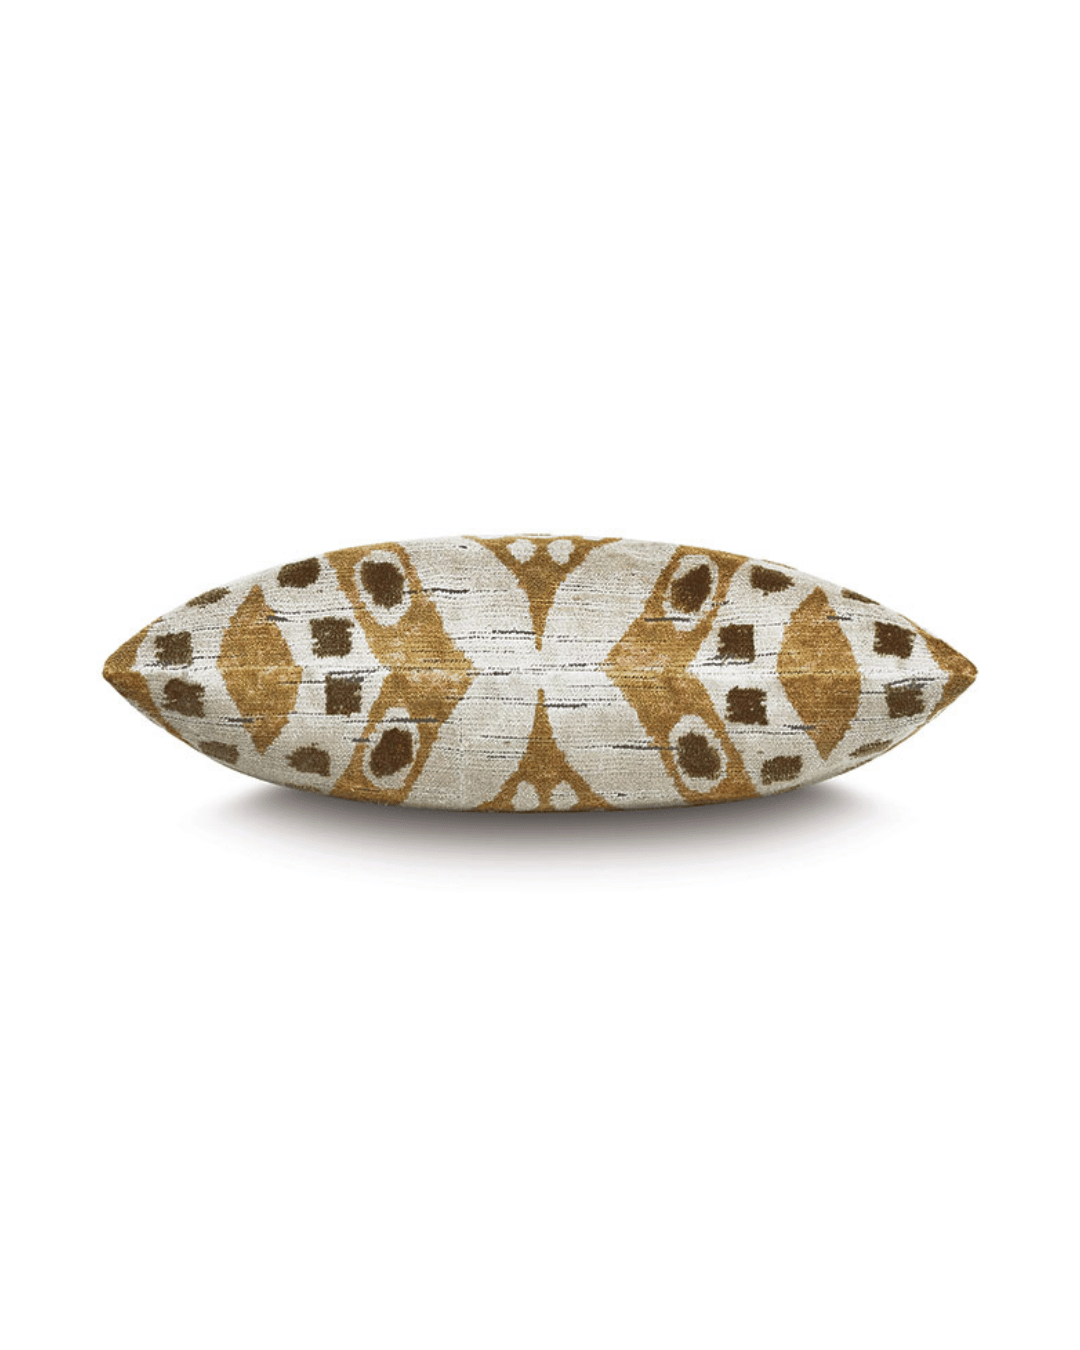 A long, oval-shaped throw pillow features a symmetrical pattern in earth tones of brown and gold on a white background. The design includes geometric shapes and intricate details, giving it a bohemian or tribal aesthetic. This Eastern Accents EARTH TONE VELVET DECORATIVE PILLOW 13x22 is slightly textured with a deluxe down feather insert.